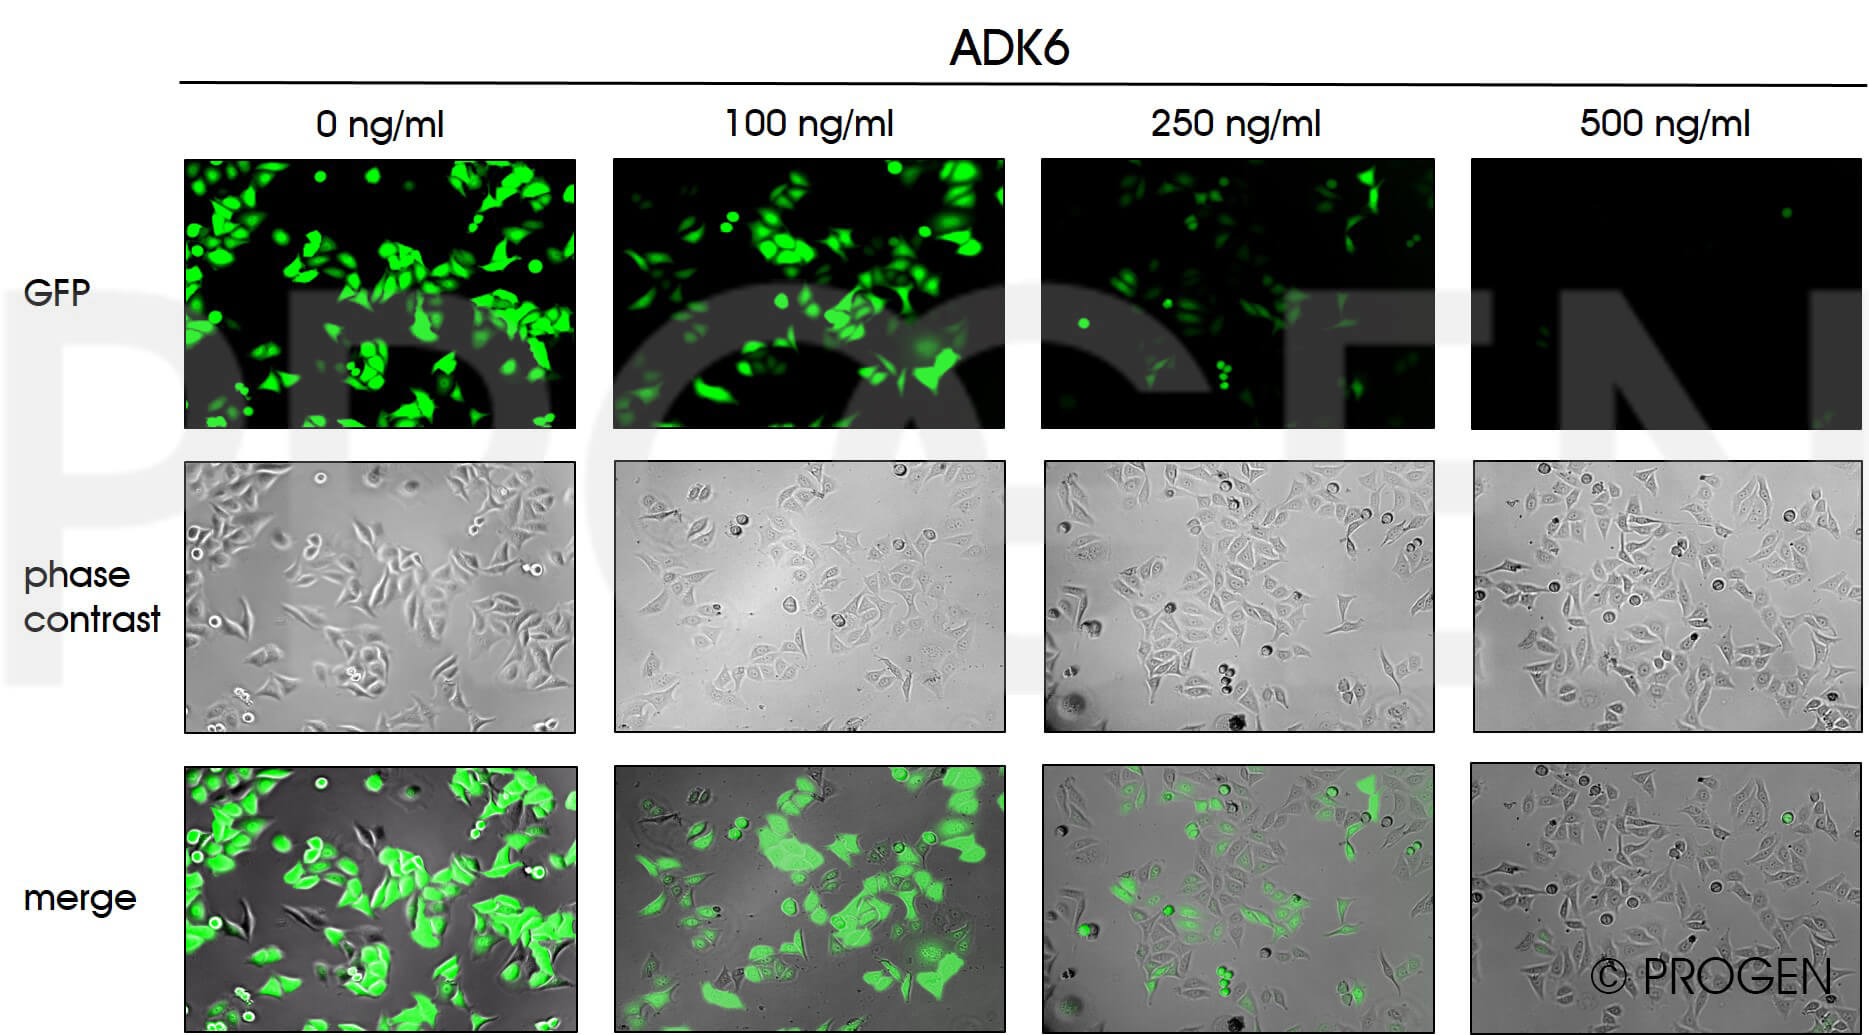 anti-AAV6 (intact particle) mouse monoclonal, ADK6